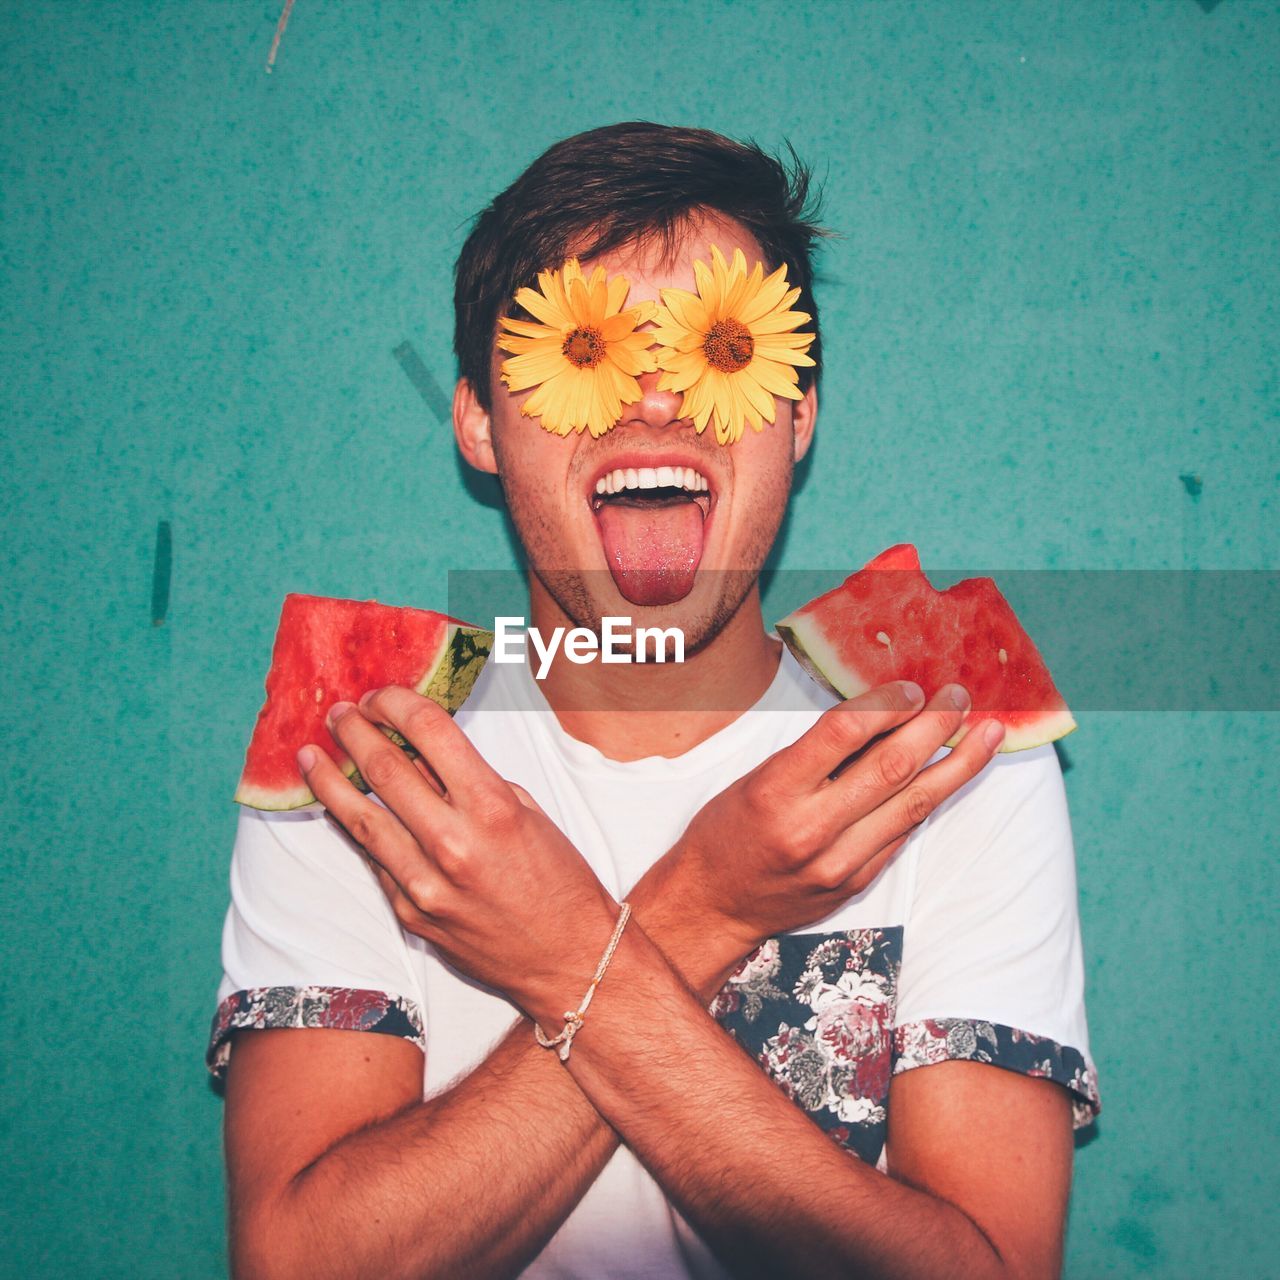 Man holding watermelon slices with eyes covered by flowers against wall